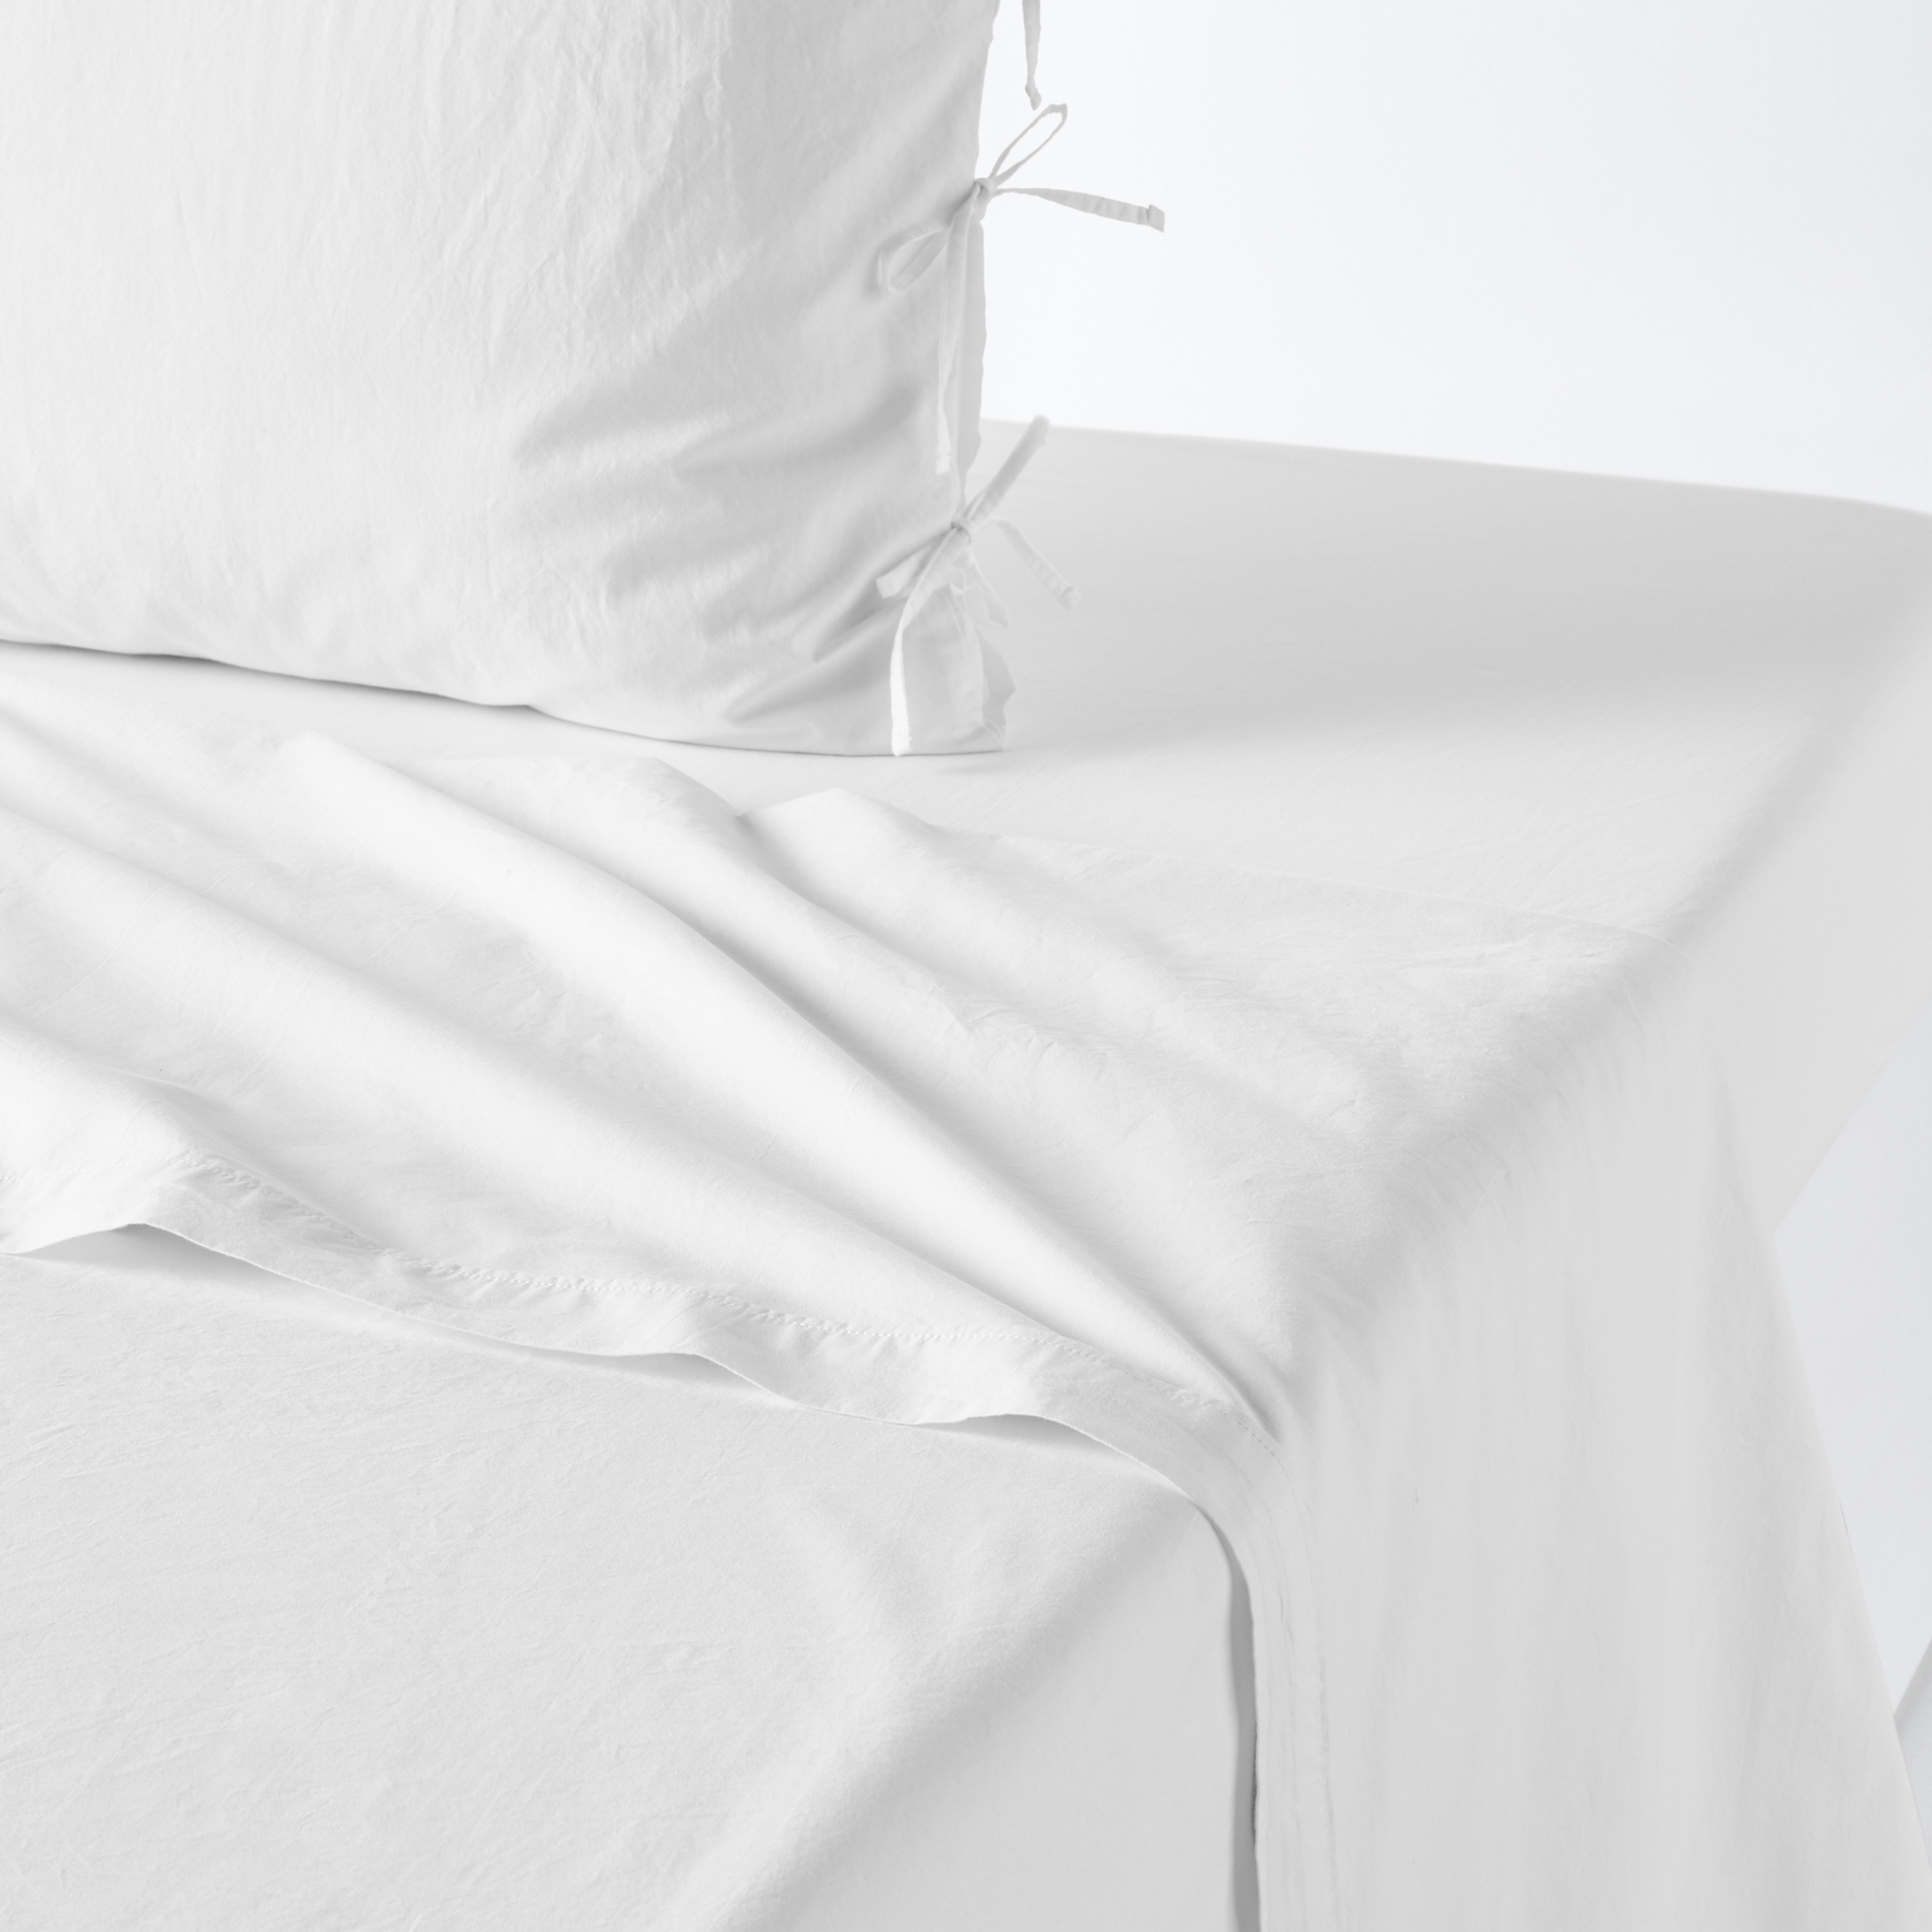 Flat Bed Sheets Cover Poly Cotton Percale 50/50 Quality All Sizes and Colors 